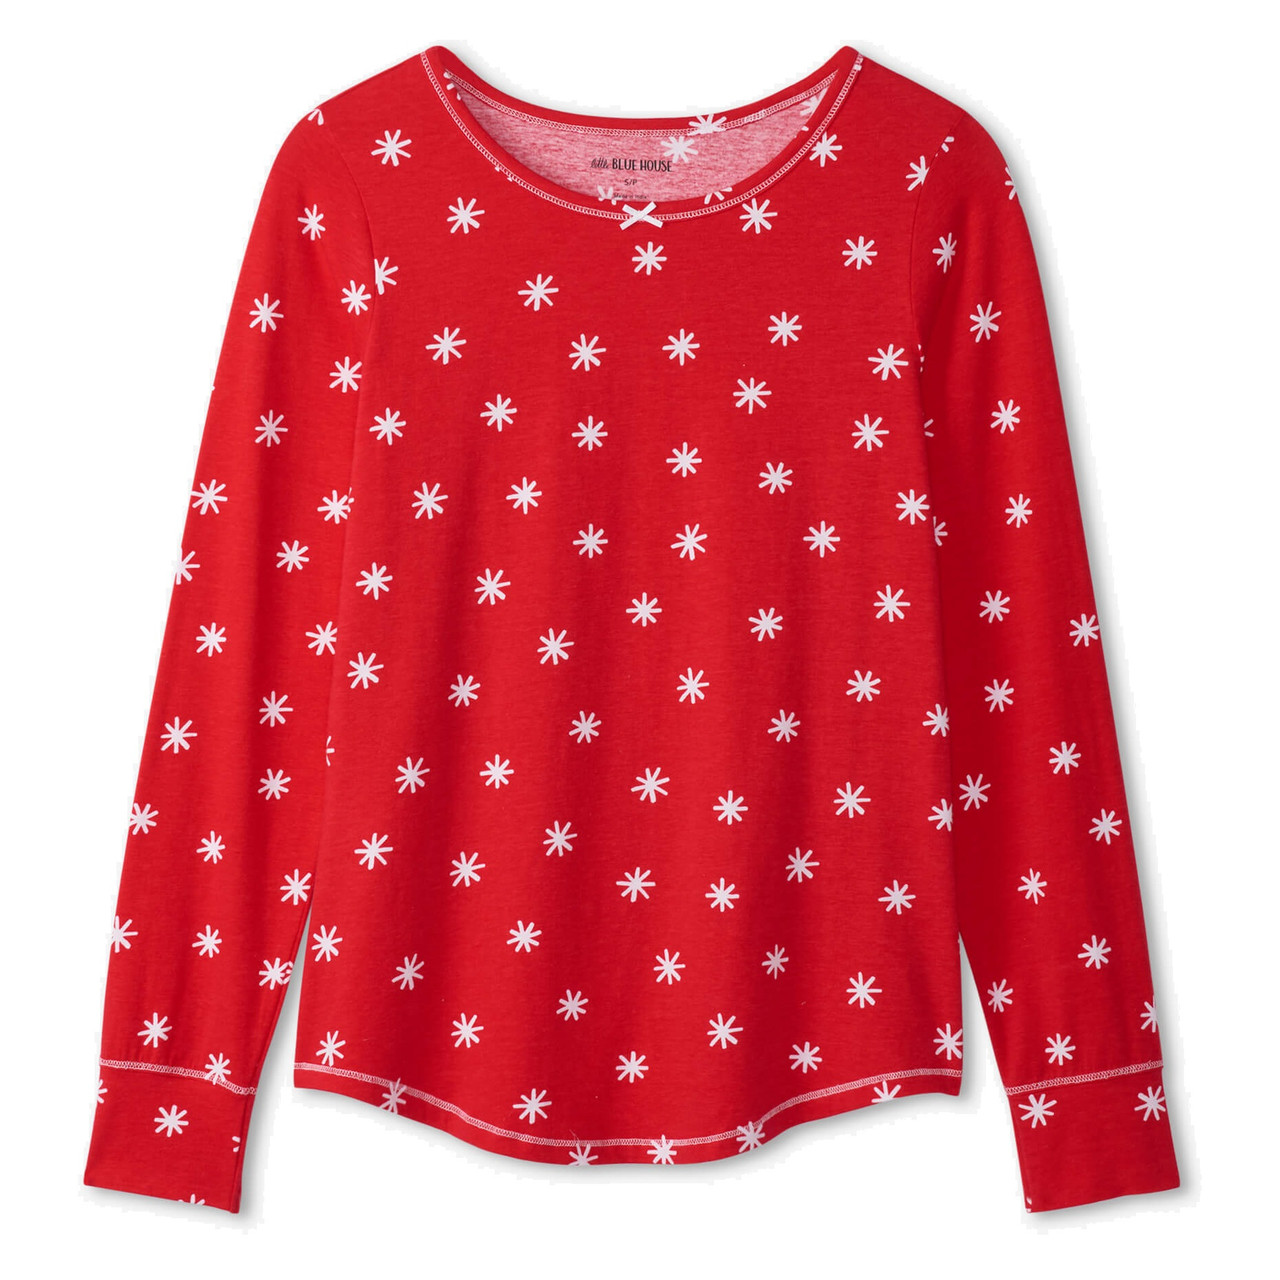 Women's Winter Snowflakes Stretch Jersey Pajama Top by Hatley 